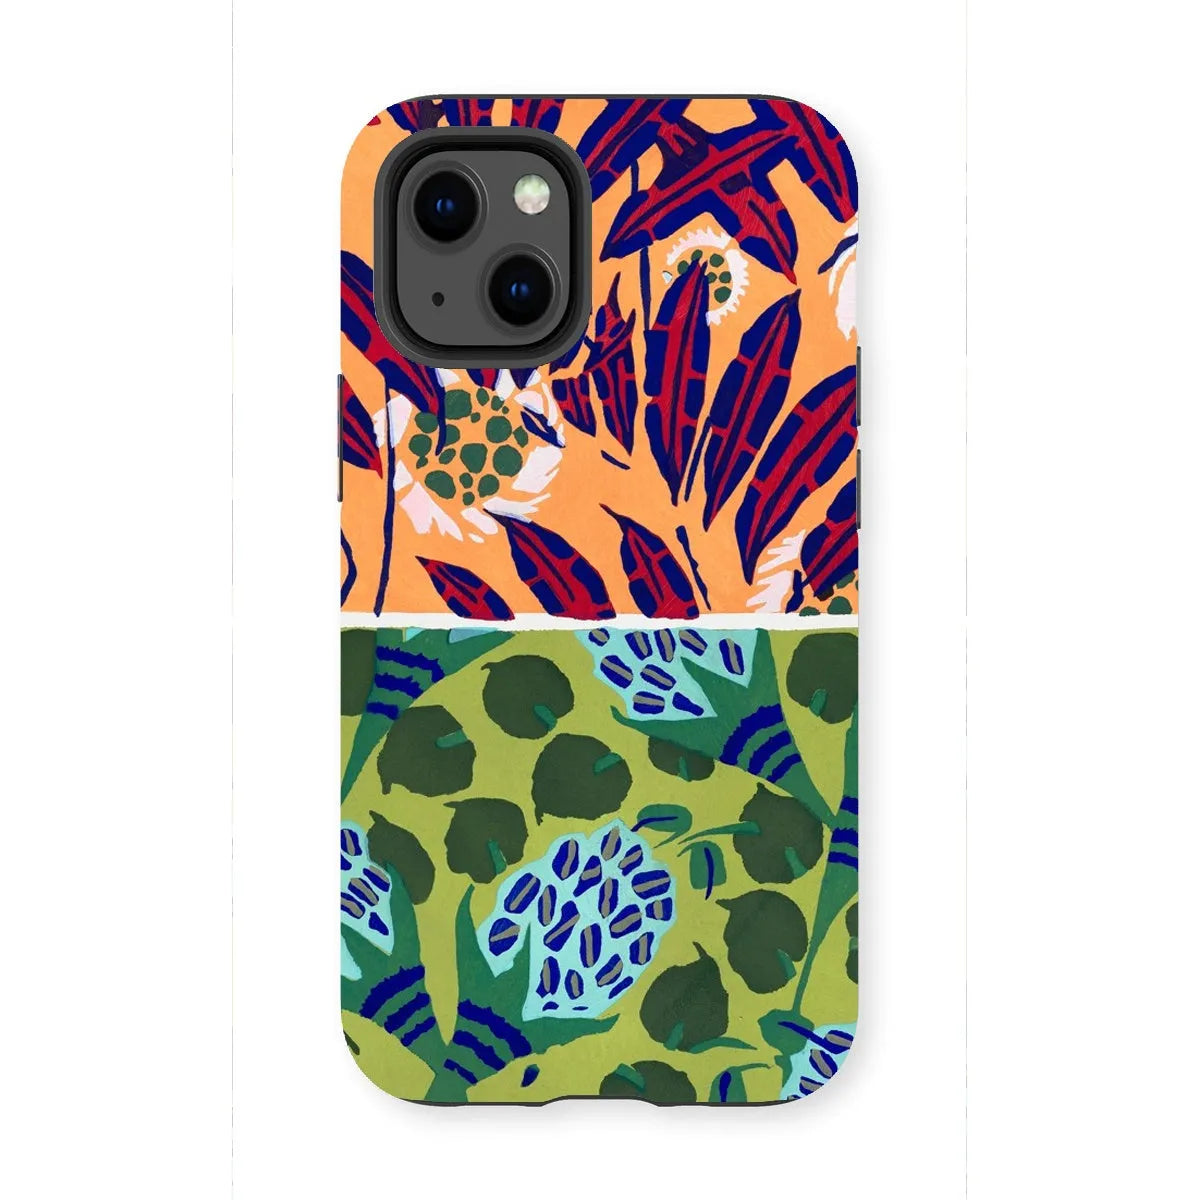 Fabric & Rugs Too - Pochoir Pattern Phone Case - E. A. Séguy - Iphone 13 Mini / Matte - Mobile Phone Cases